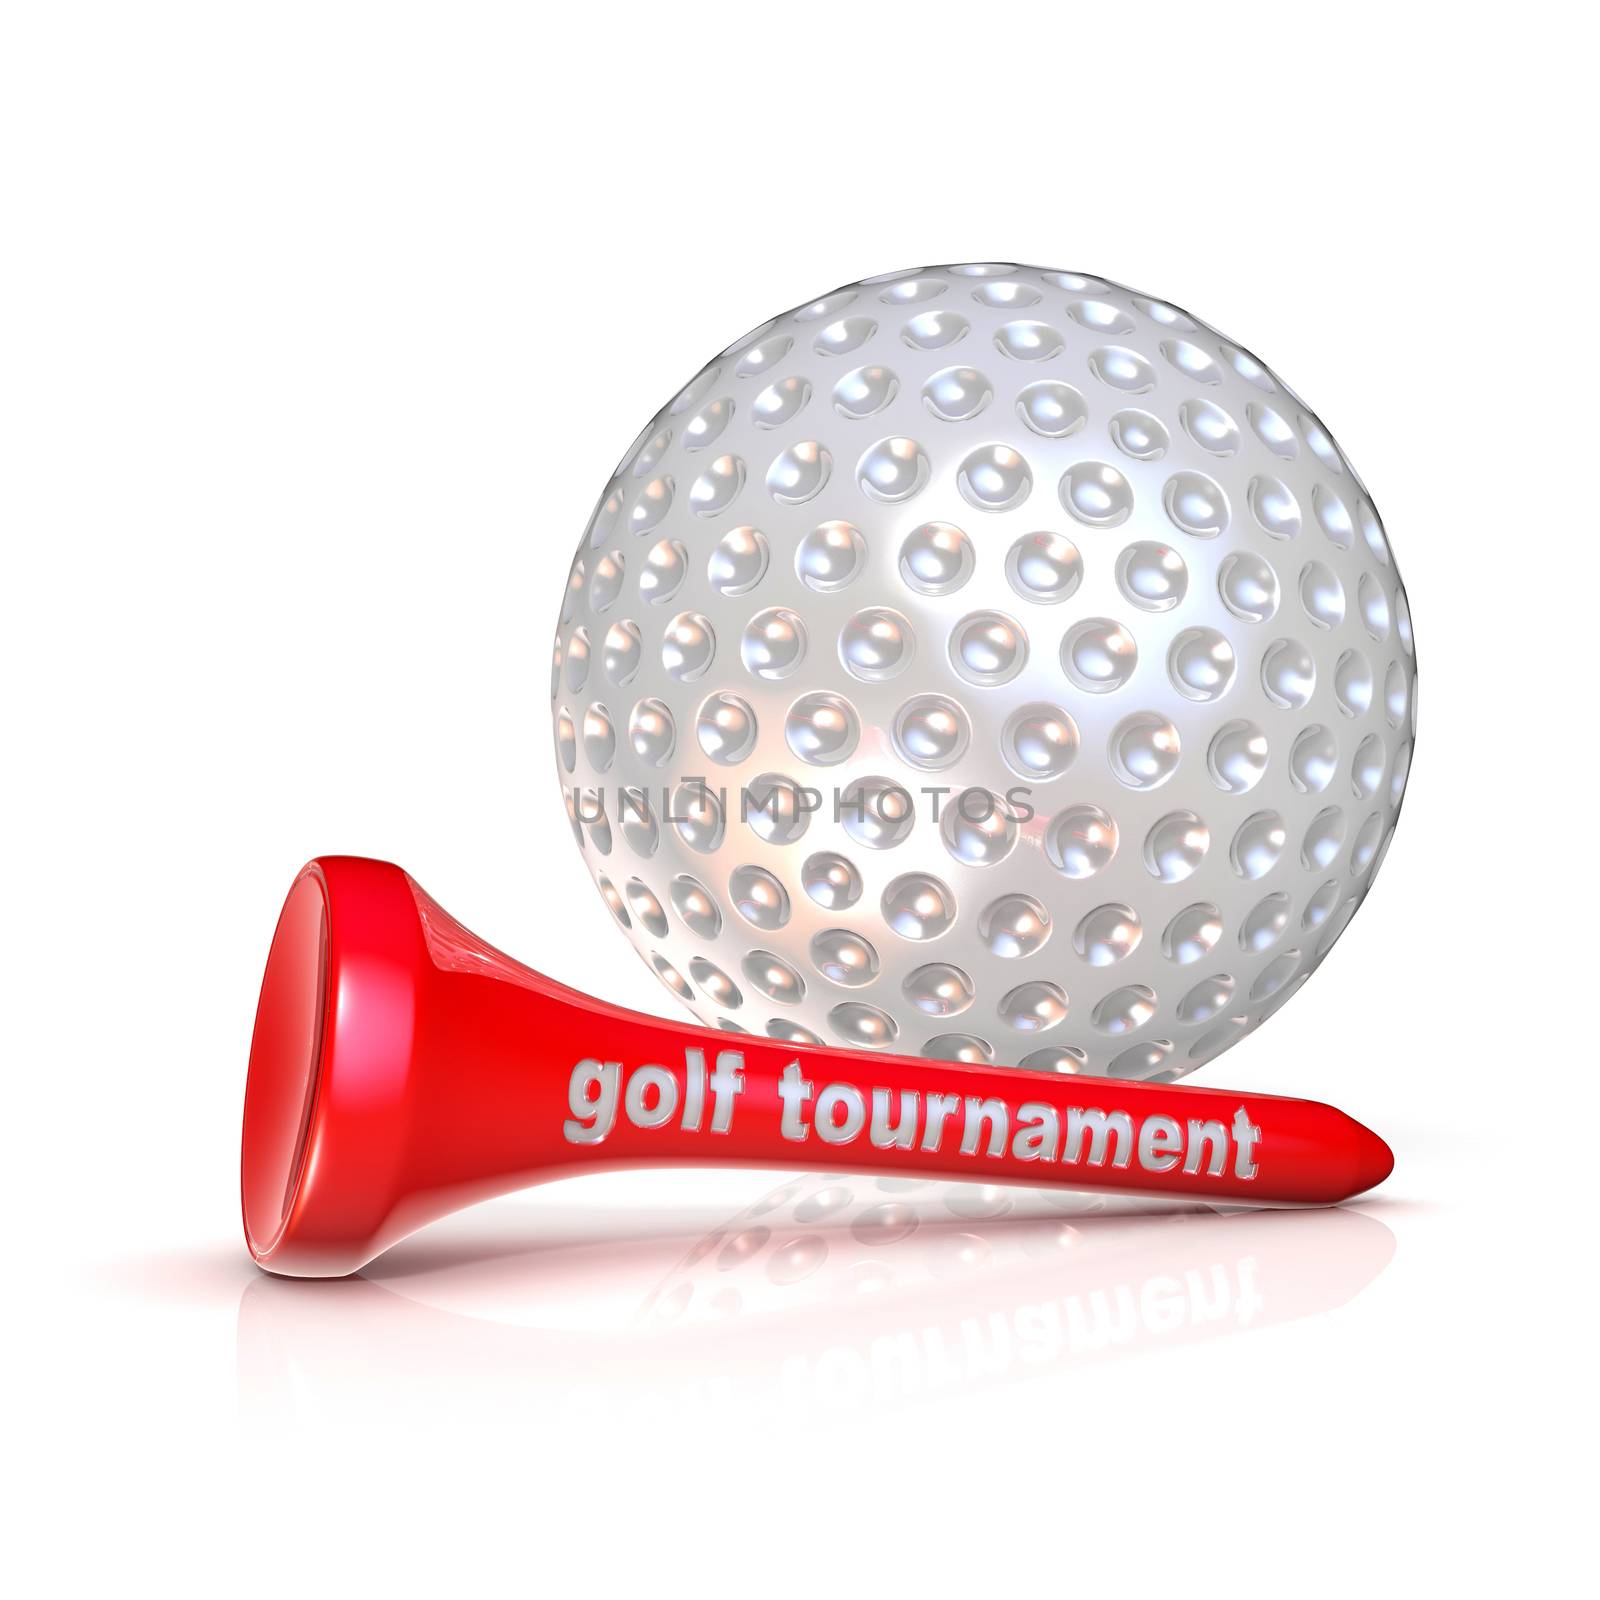 Golf ball and tee. Golf tournament sign. Isolated over white bac by djmilic